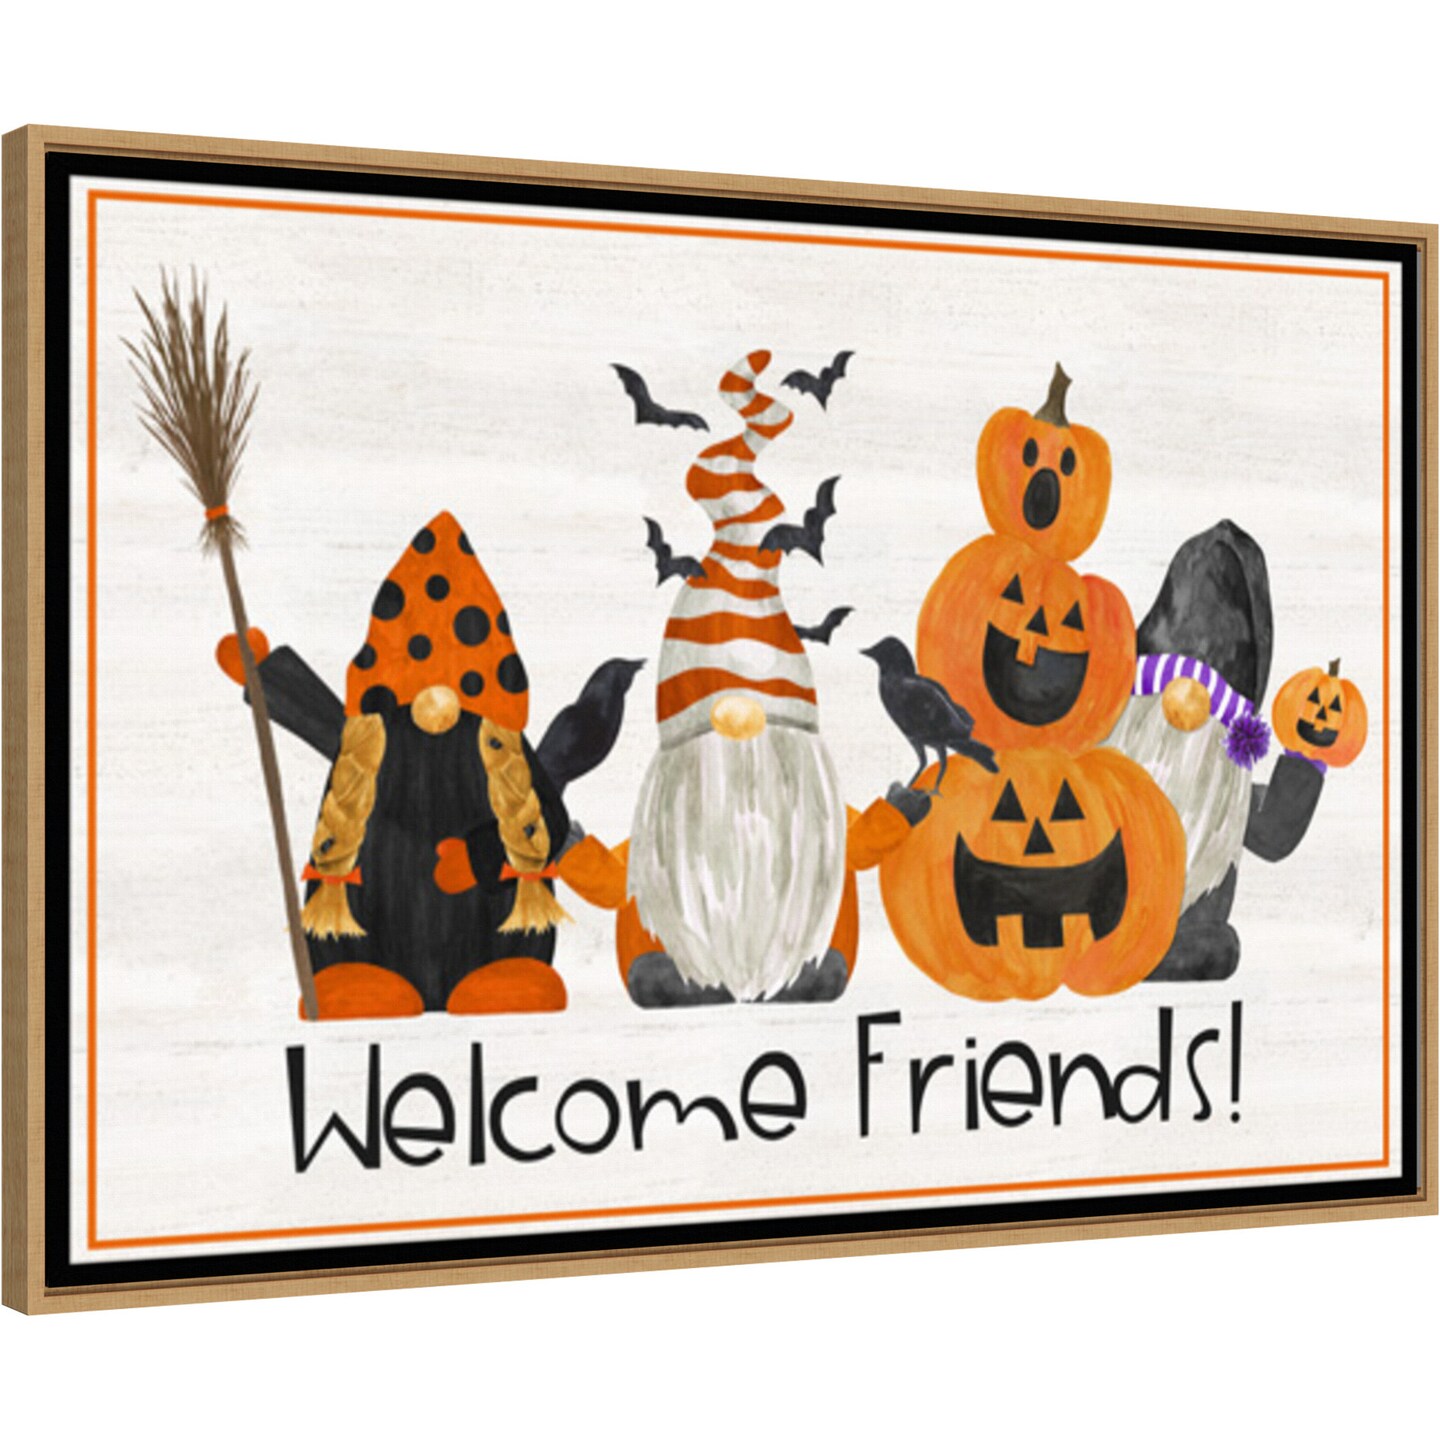 Gnomes of Halloween landscape II-Welcome Friends by Tara Reed 33-in. W x 23-in. H. Canvas Wall Art Print Framed in Natural